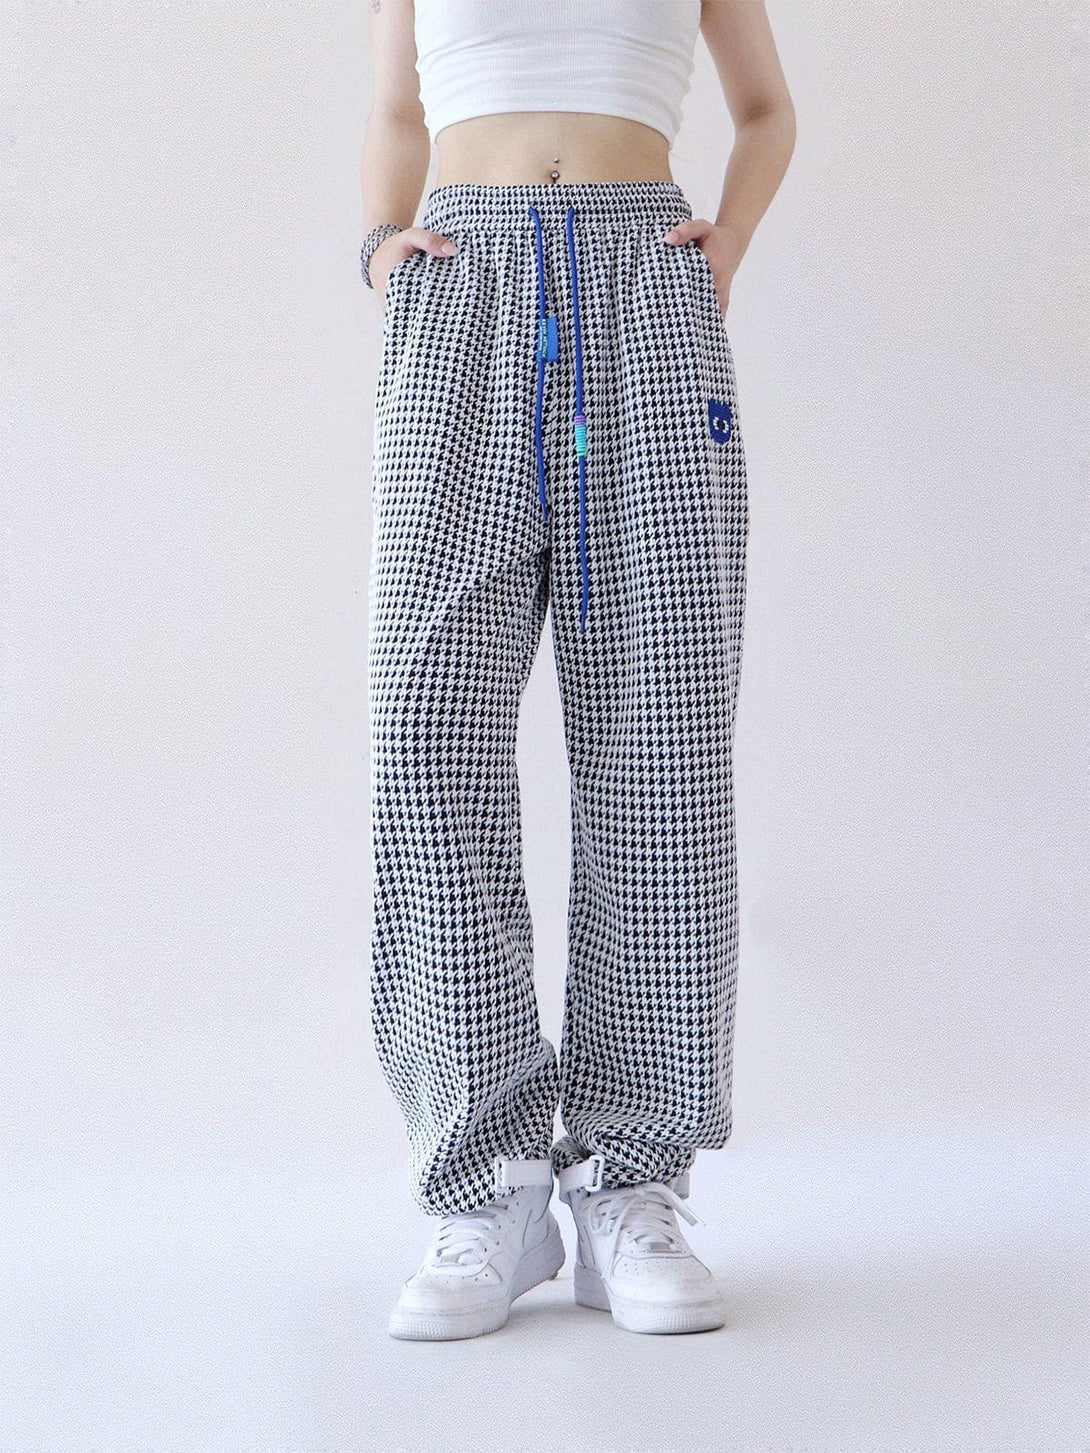 Majesda® - Houndstooth Straight-leg Casual Pants outfit ideas streetwear fashion